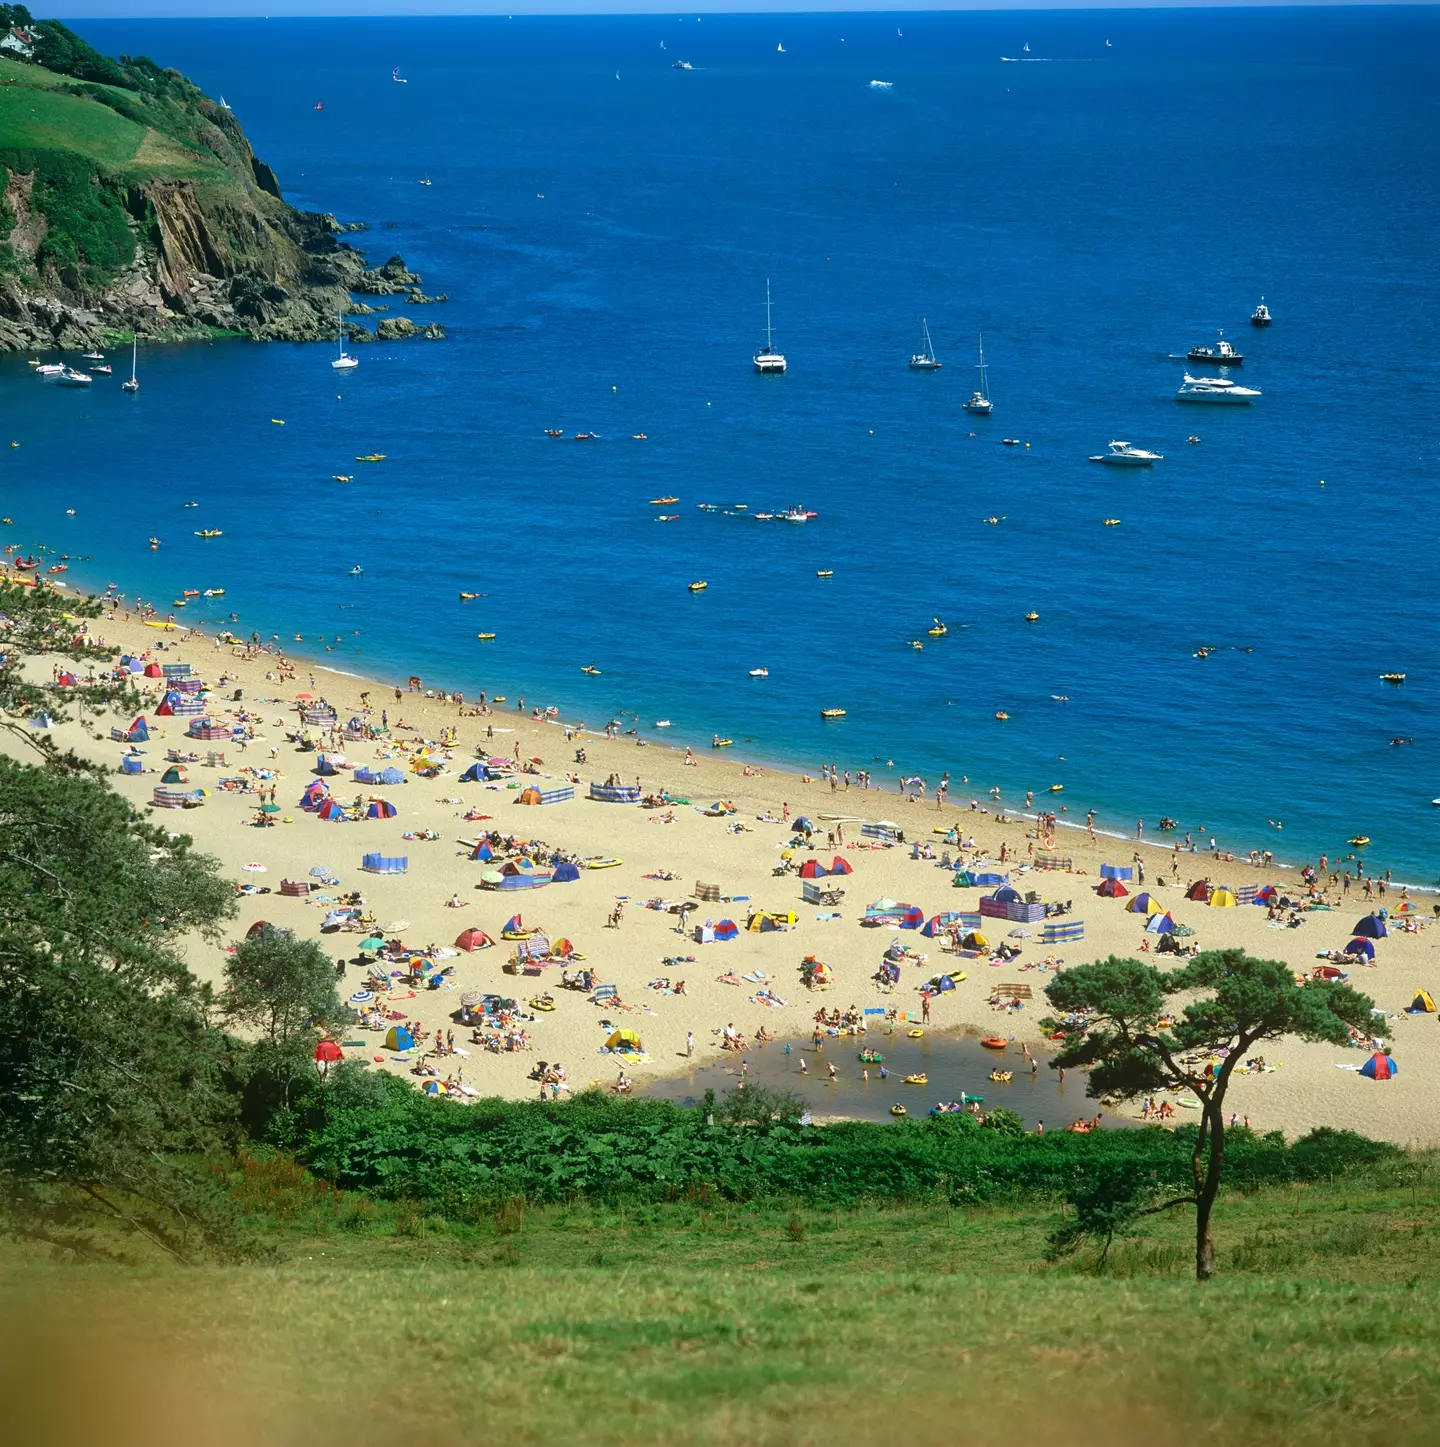 Some of the UK's greatest beaches are on the list.